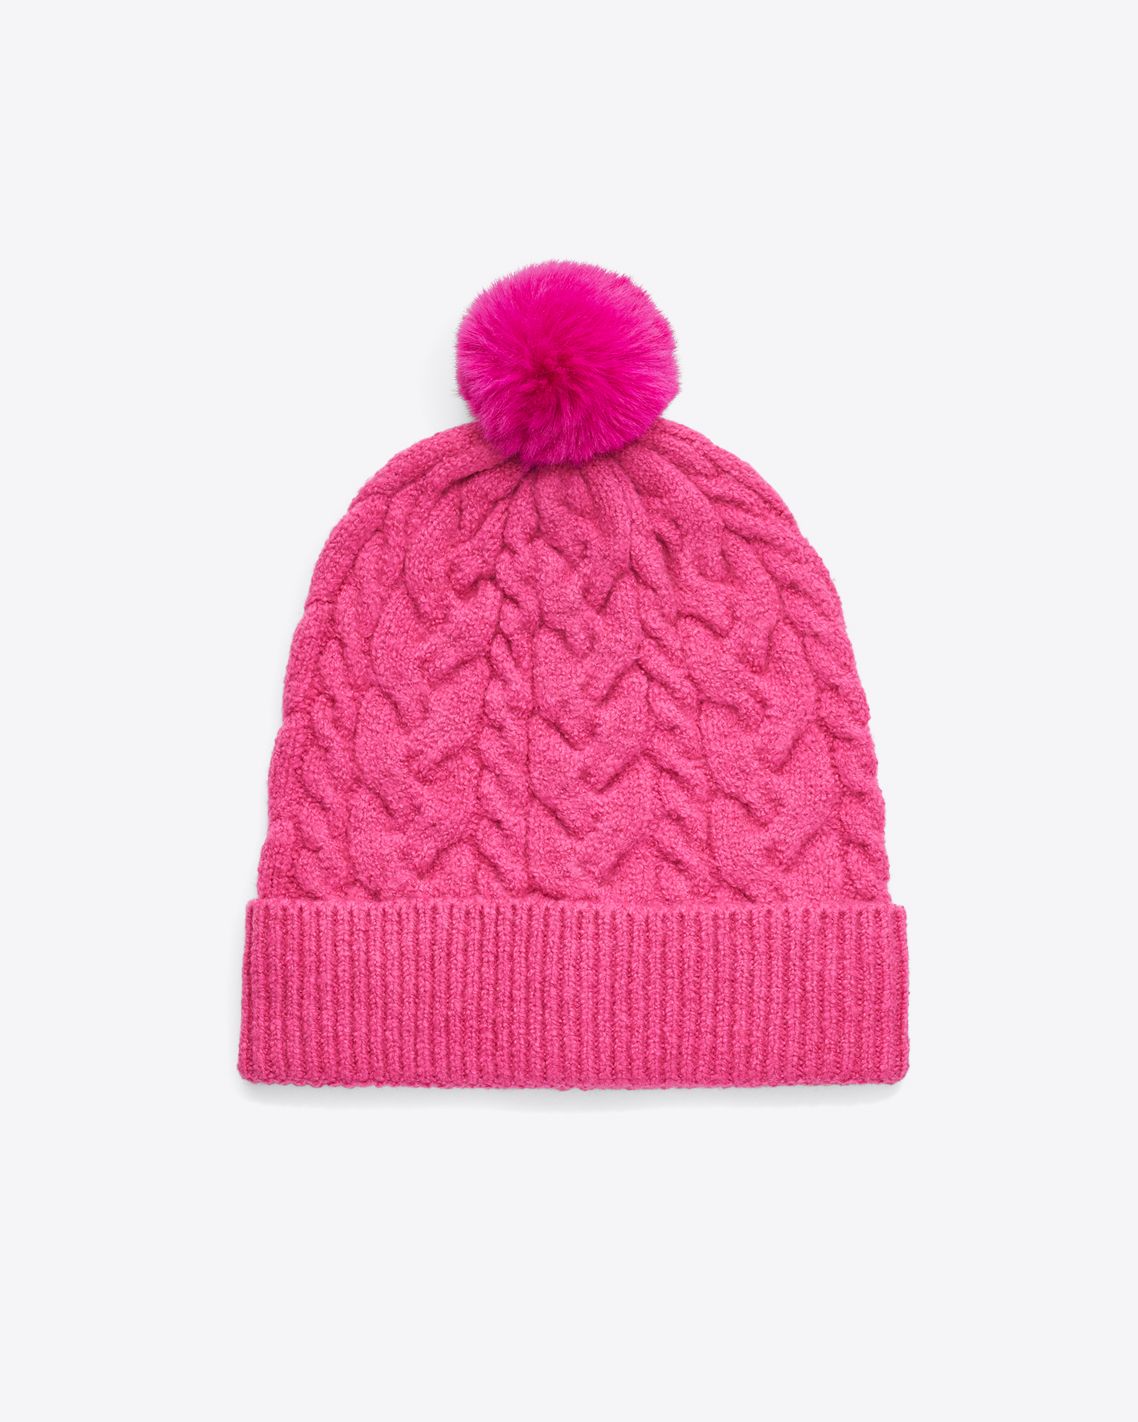 Cable Knit Hat with Pom Pom in Raspberry Pink